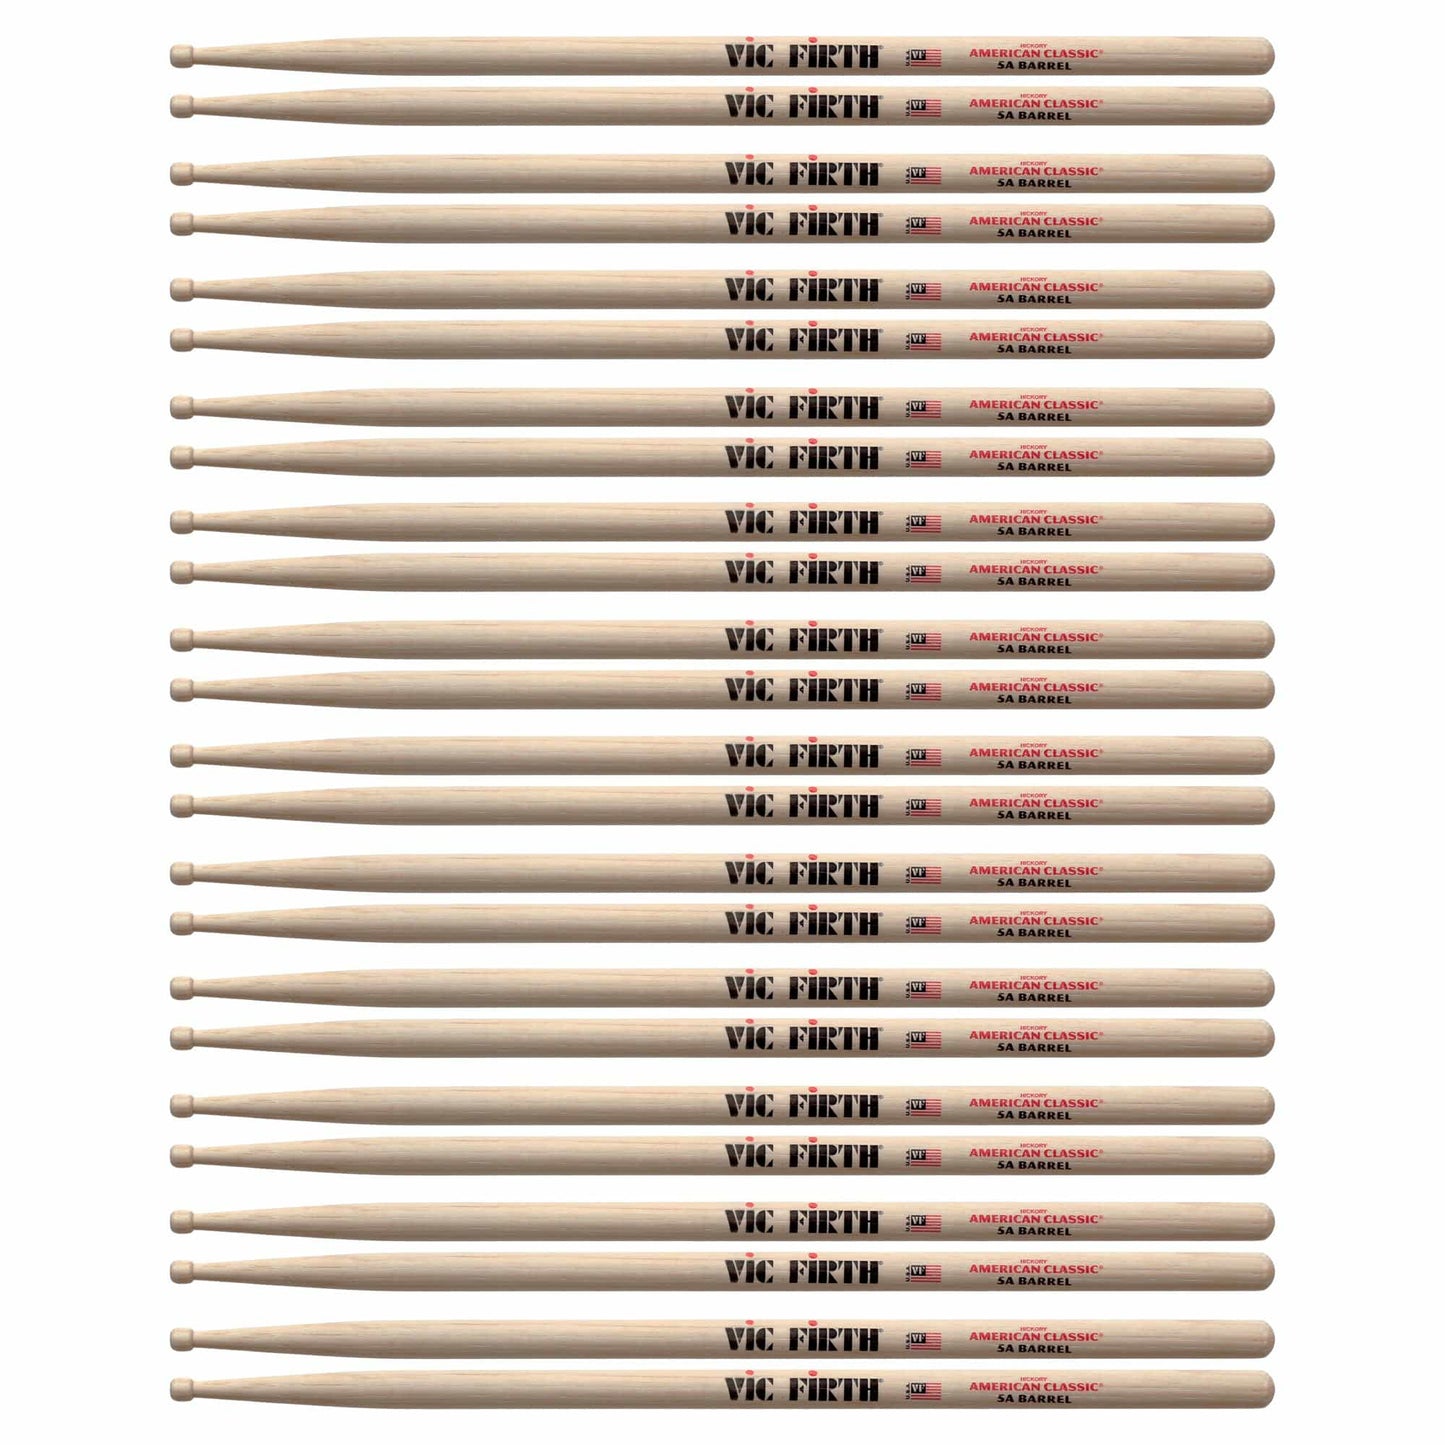 Vic Firth American Classic 5A Barrel Drum Sticks (12 Pair Bundle) Drums and Percussion / Parts and Accessories / Drum Sticks and Mallets